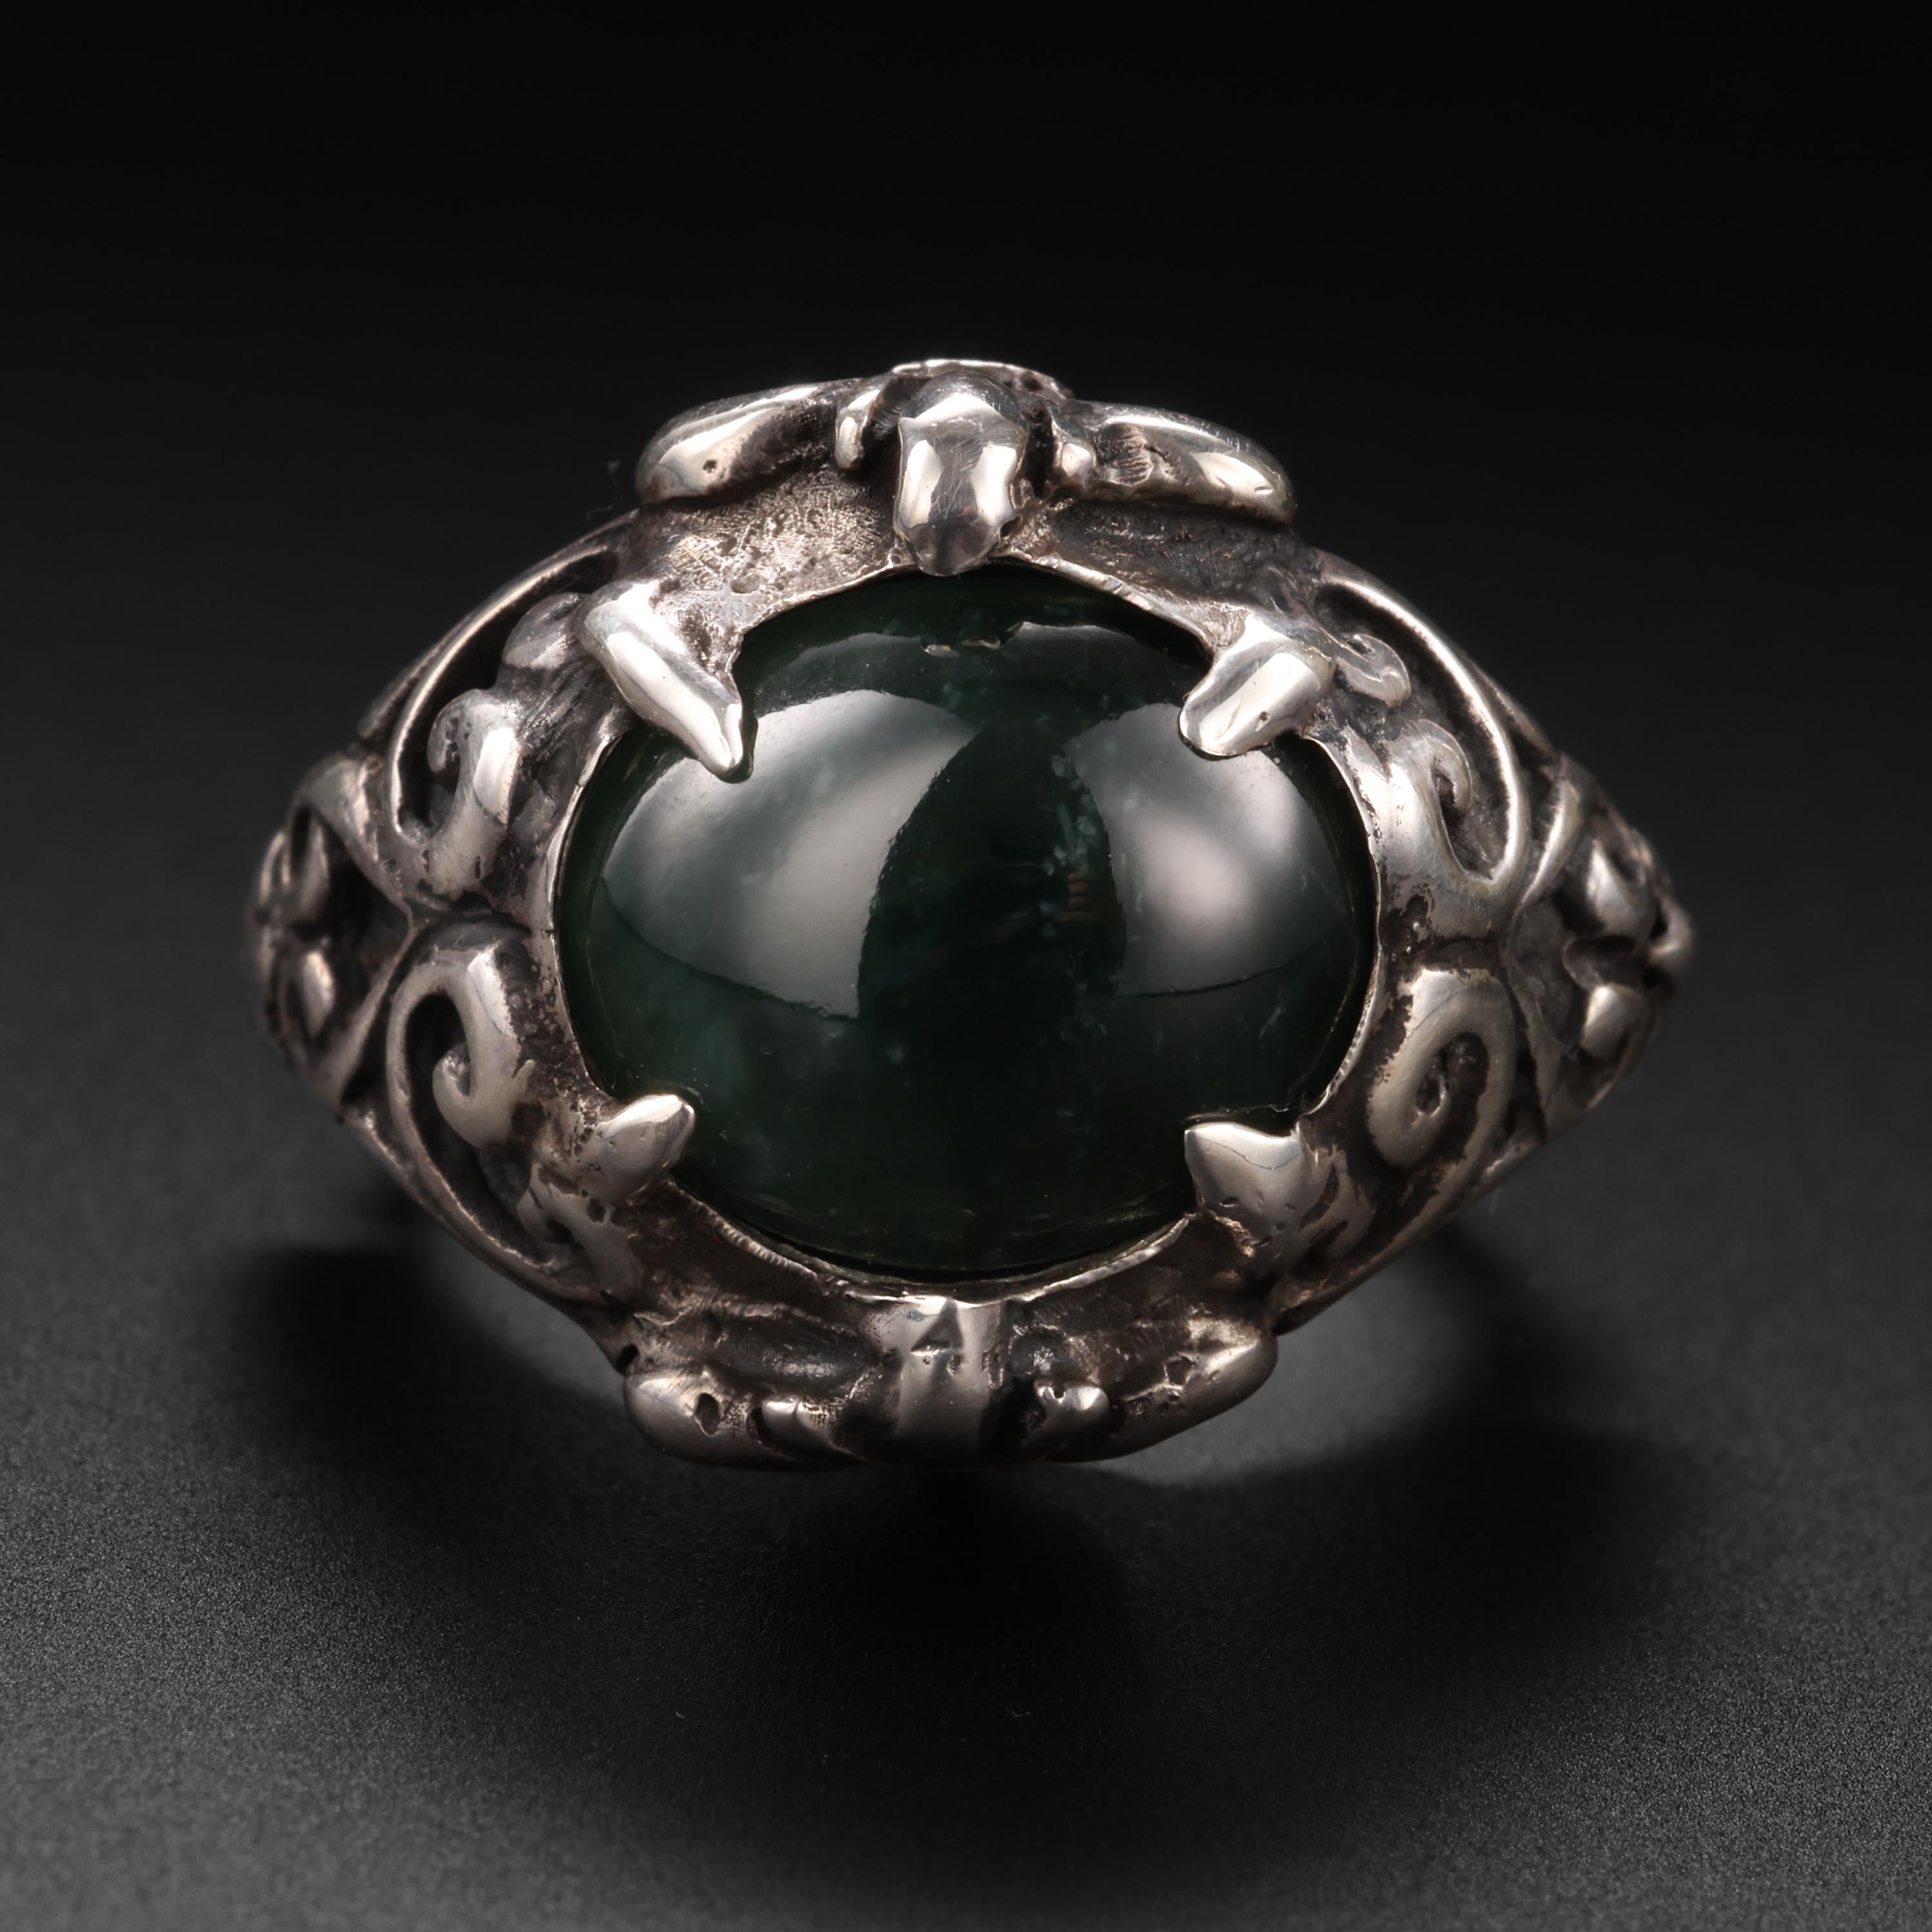 Looking like a ring straight from the 17th-century, this contemporary Baroque-style hand-fabricated silver ring showcases a high-polish oval cabochon of certified untreated black Burmese jadeite. Actually, it's dark green jade. But unless it's